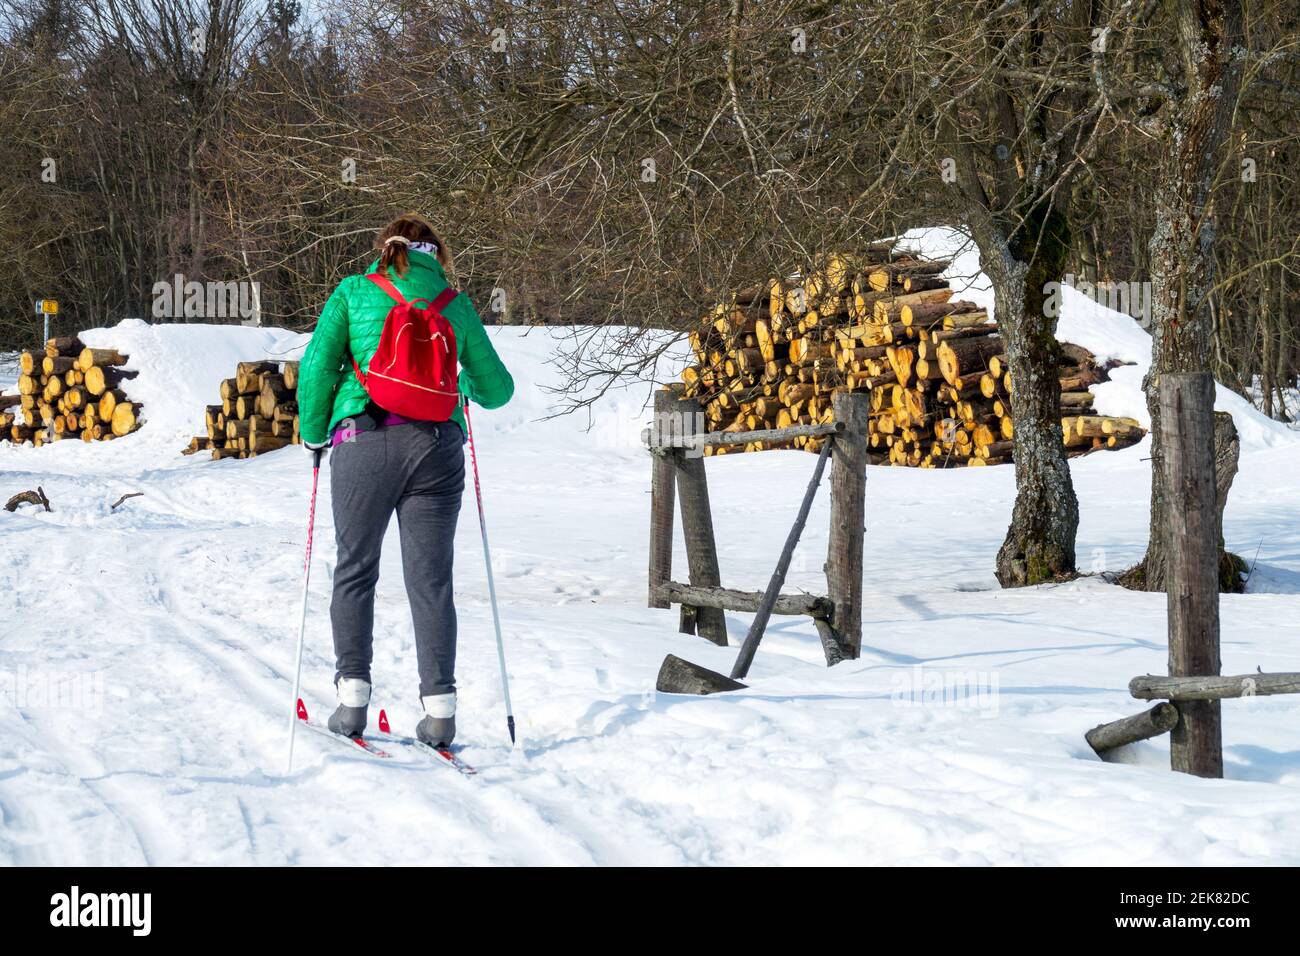 Woman skiing in rural landscape, cross country skier healthy lifestyle, active woman woman walking in countryside winter Stock Photo